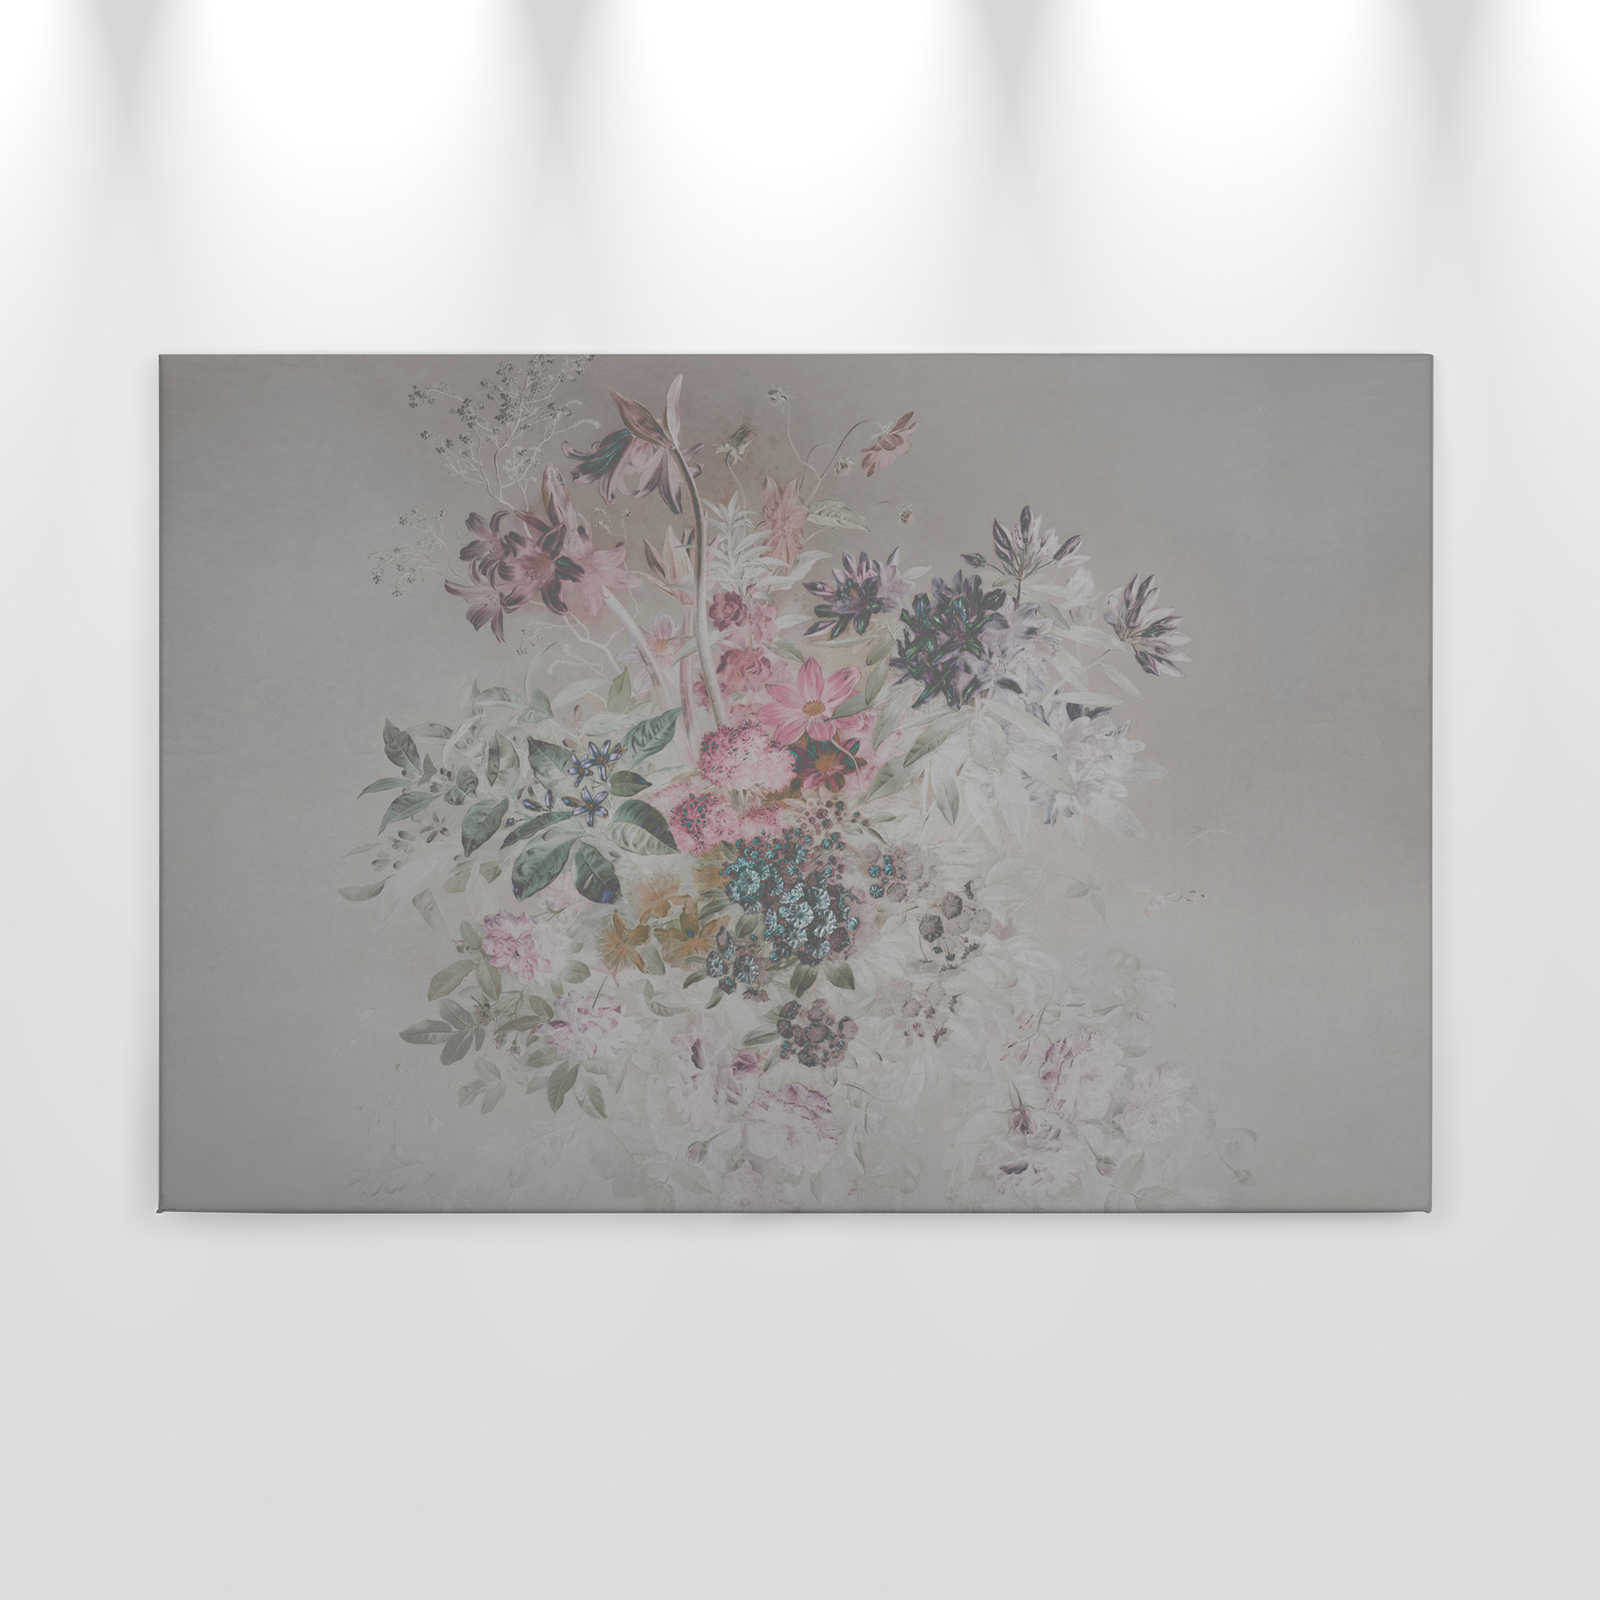             Flowers canvas picture with pastel design | pink, grey - 0.90 m x 0.60 m
        